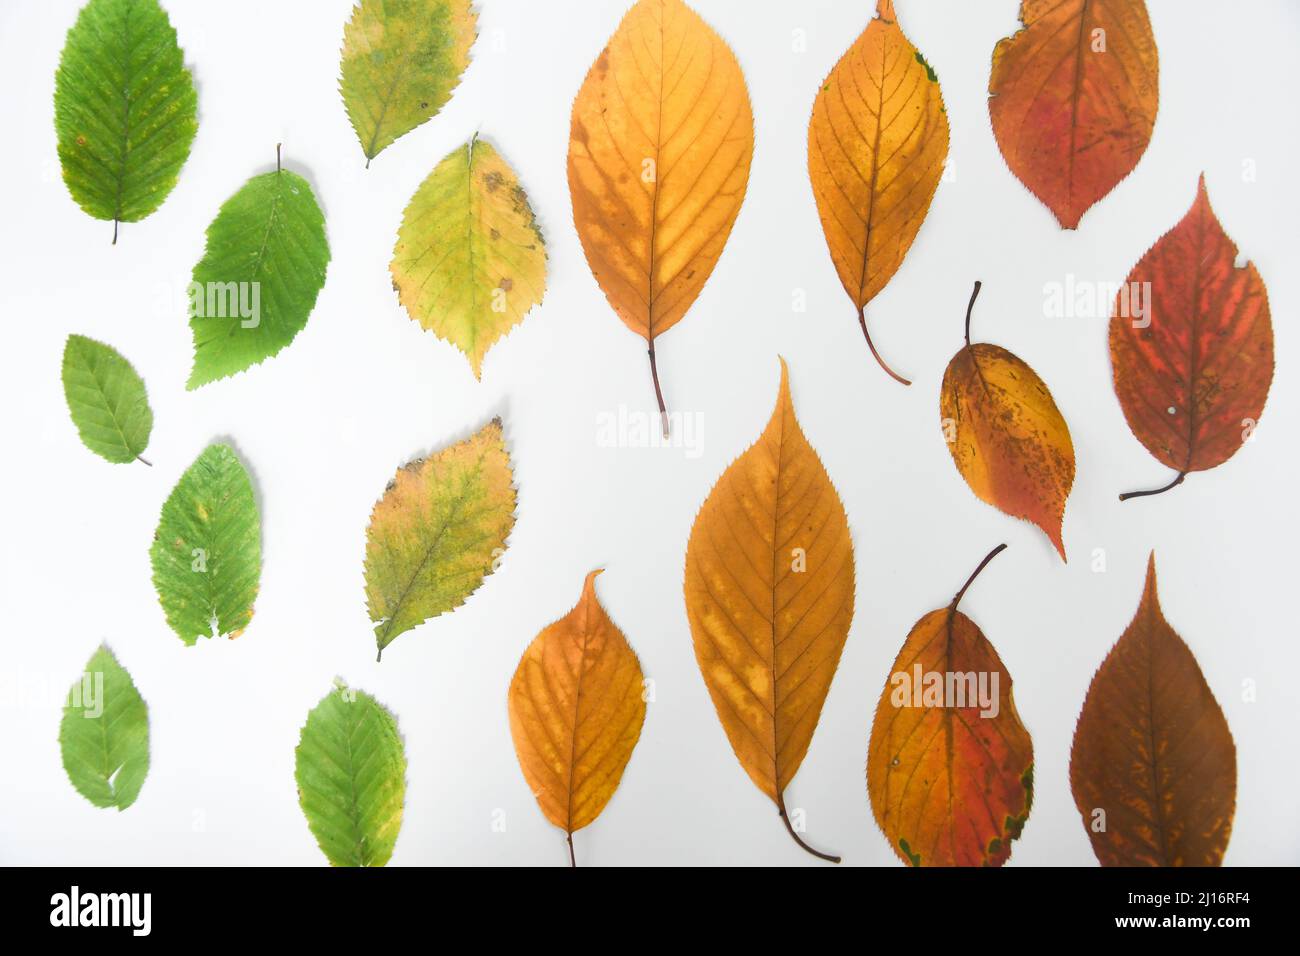 Overhead of different colored leaves of different seasons Stock Photo